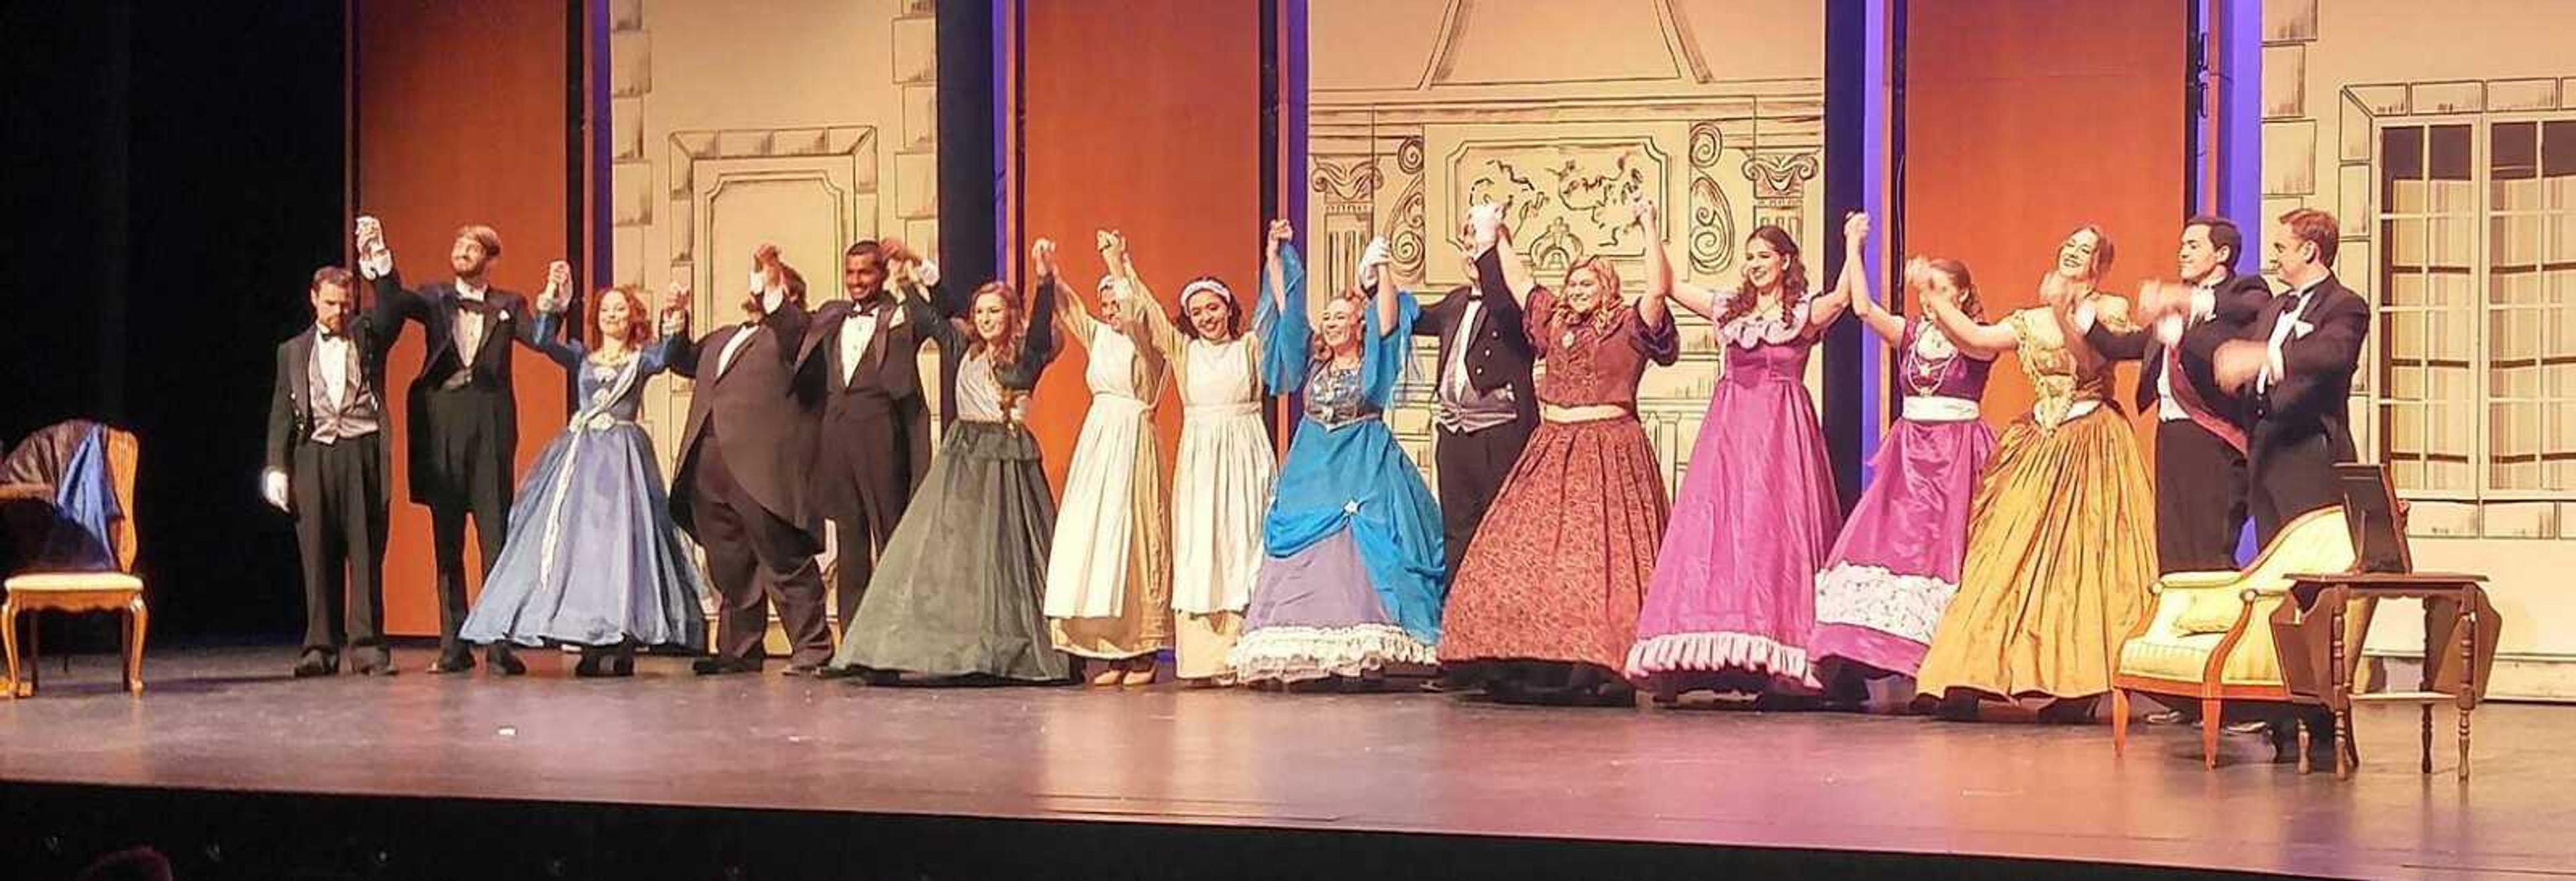 The cast of 'Cinderella' takes a bow after their performance, Jan. 19.